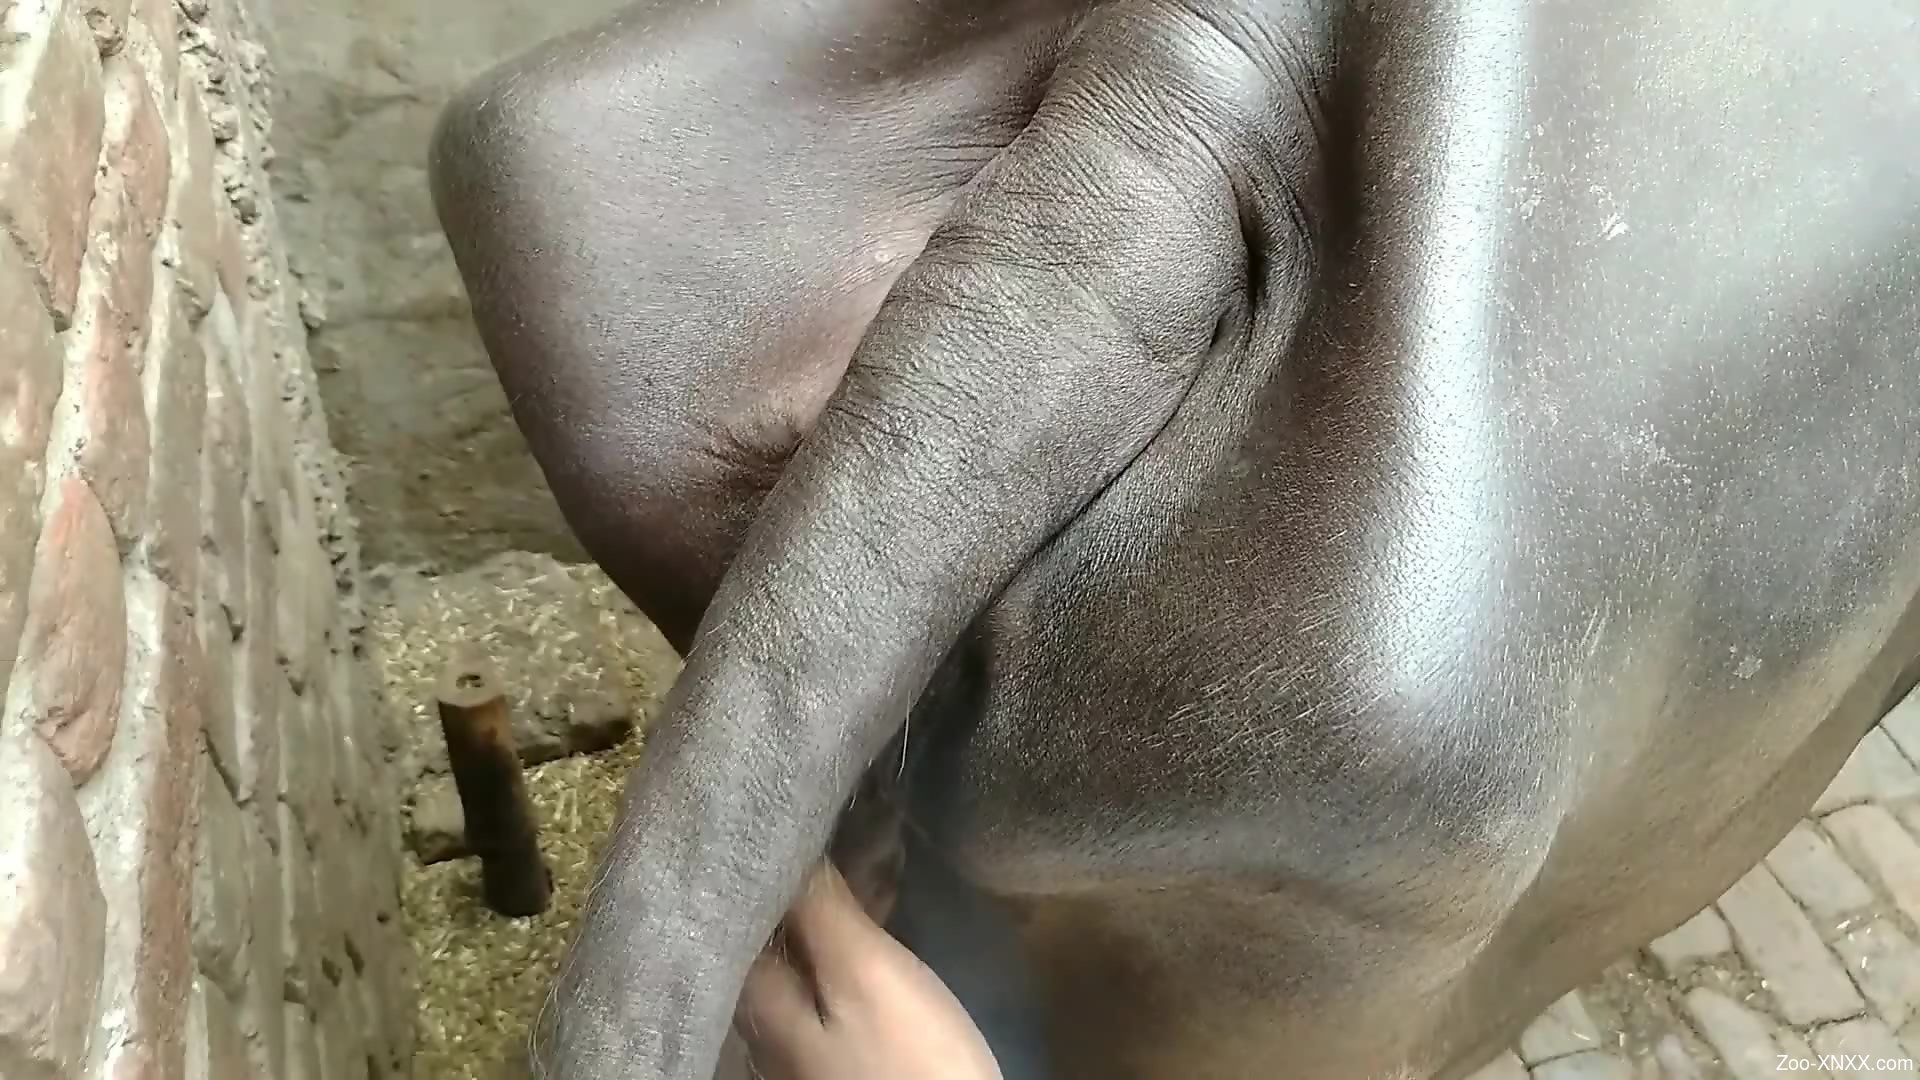 Man wants to fuck this cows pussy in such a hard mode photo